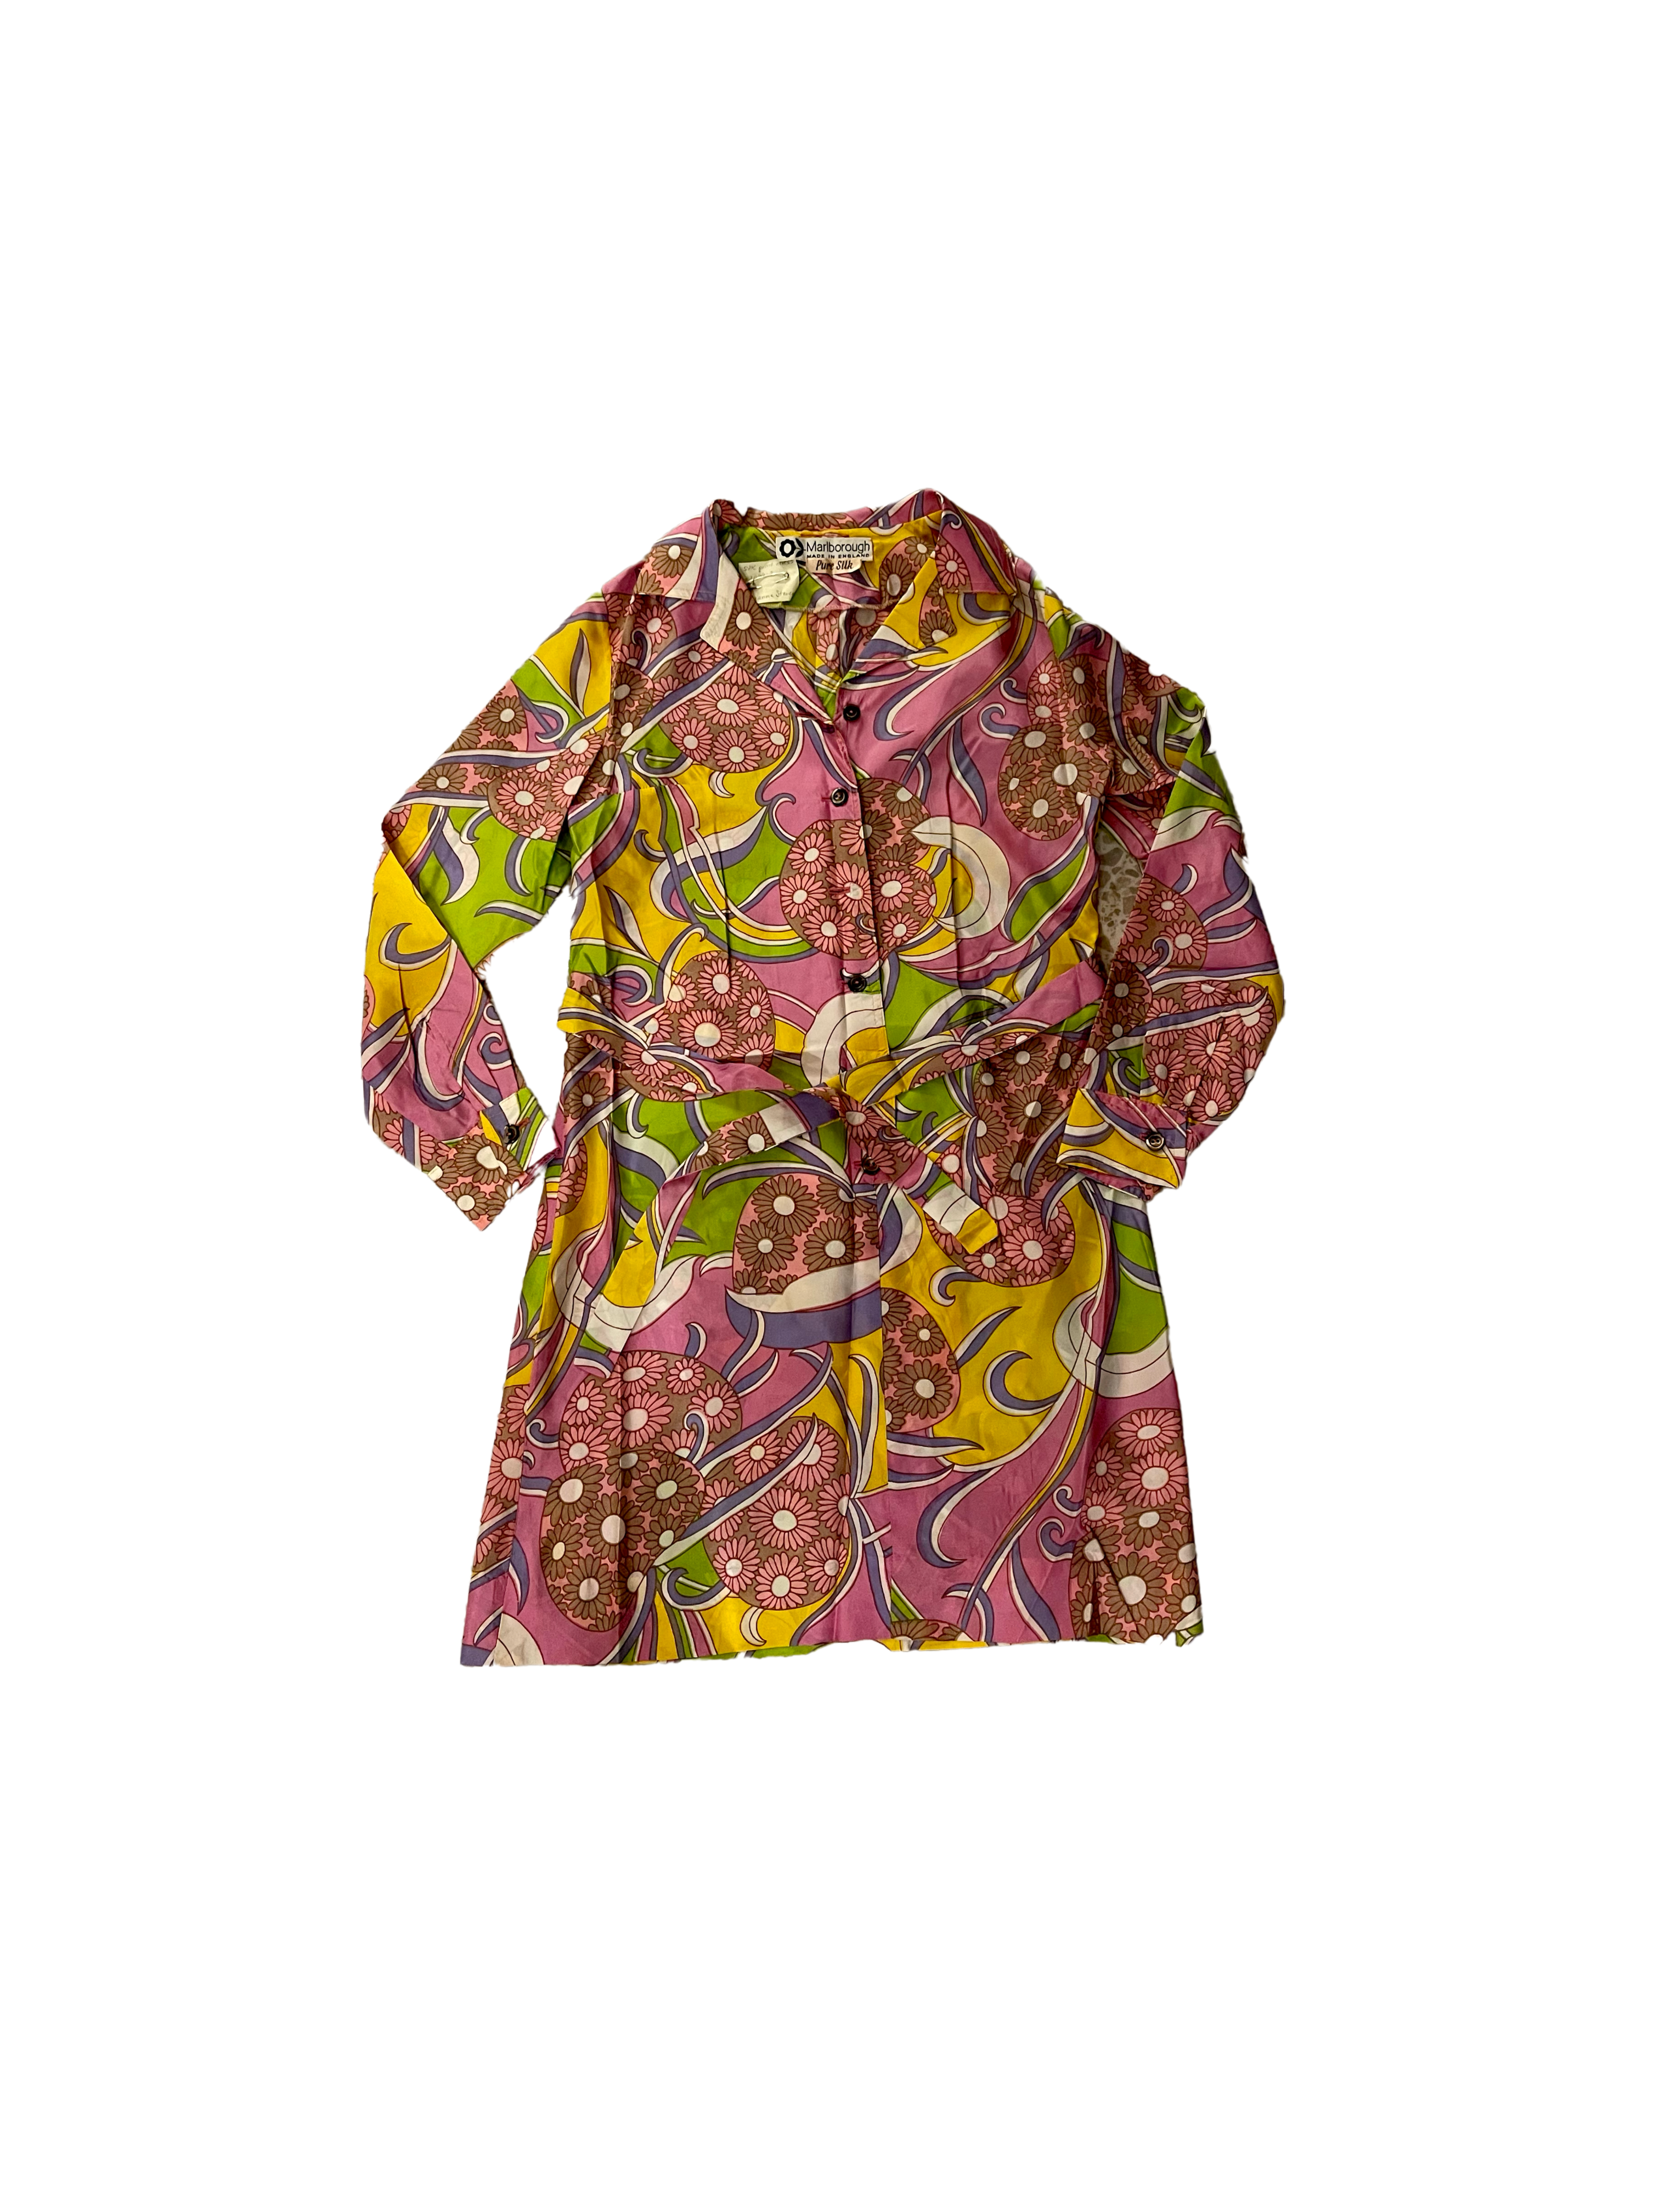 Vintage 1966 long Sleeve abstract floral Dress